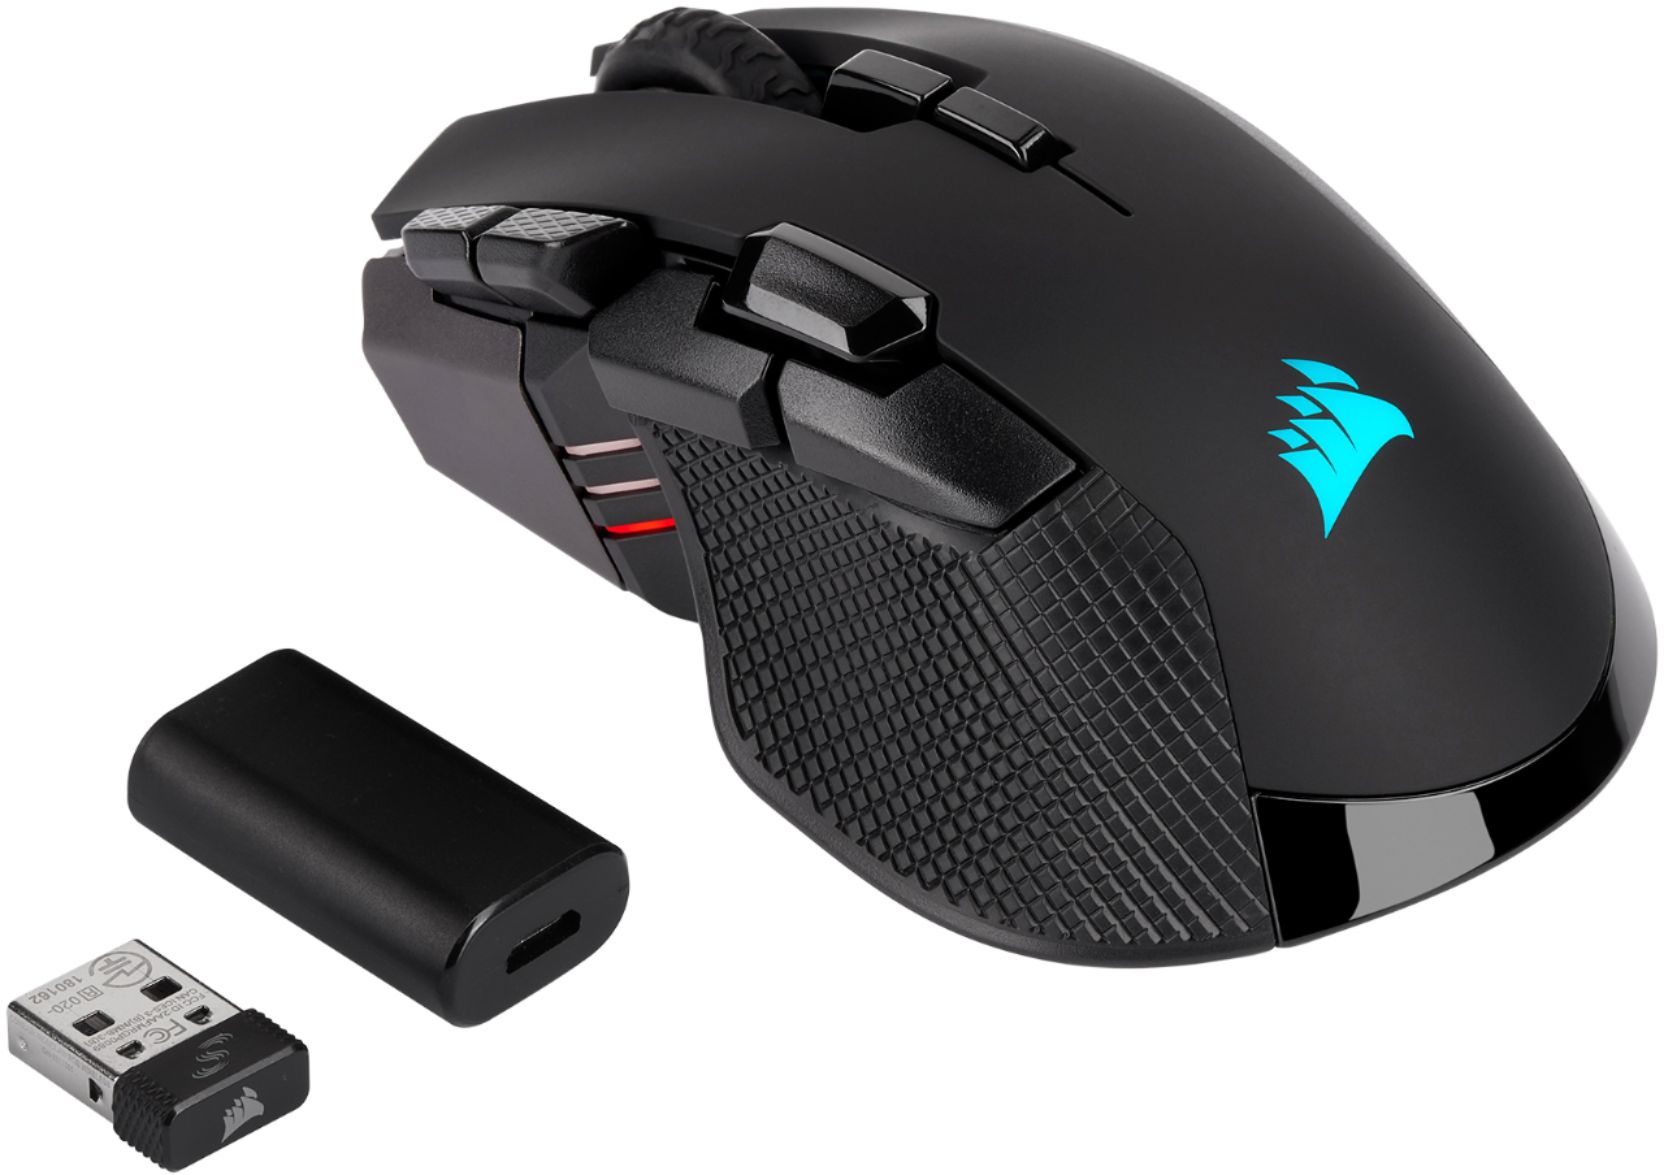 Korean solo indvirkning CORSAIR IRONCLAW RGB Wireless Optical Gaming Mouse Black CH-9317011-NA -  Best Buy